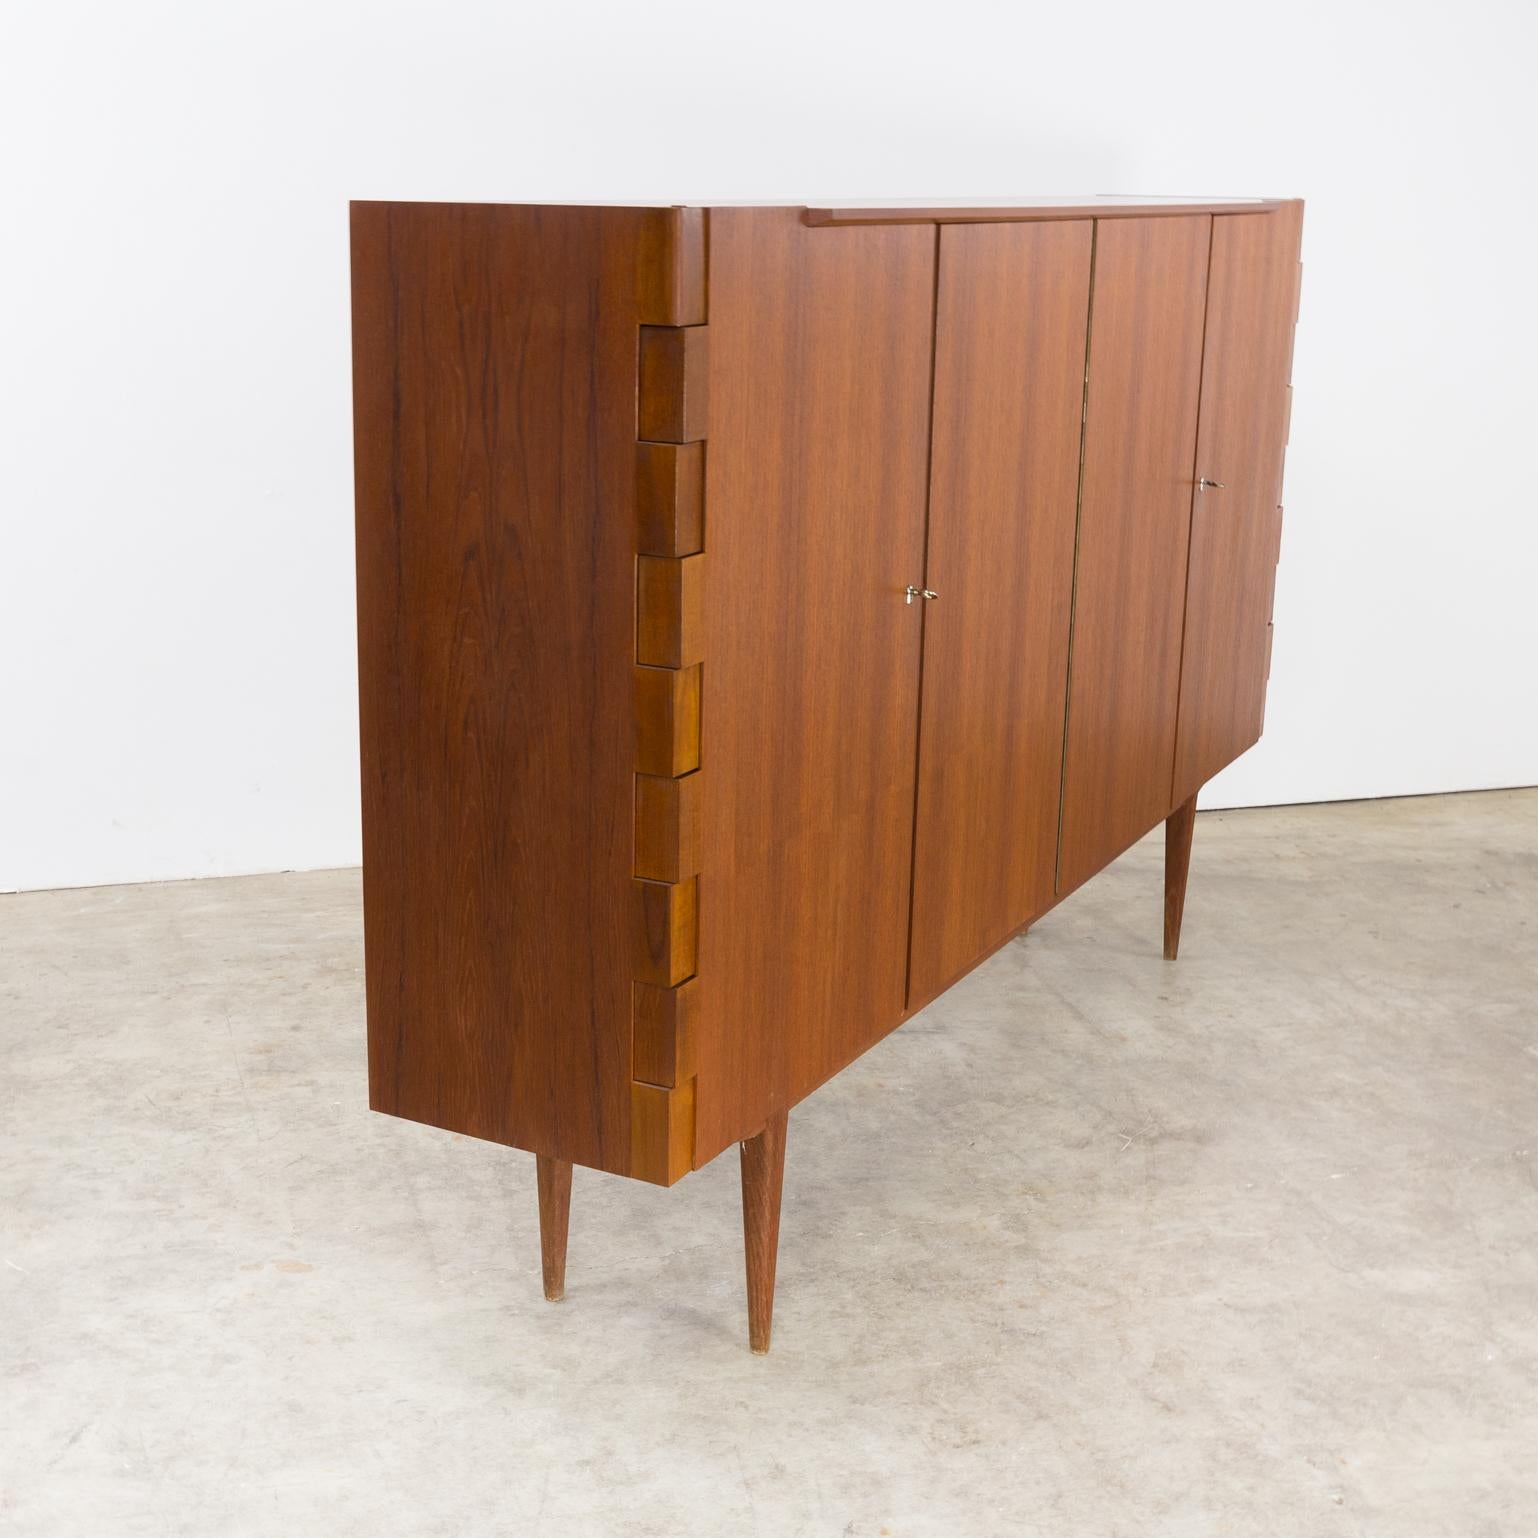 Mid-20th Century 1960s Very Rare Teak High Sideboard with Hinge-Joints For Sale